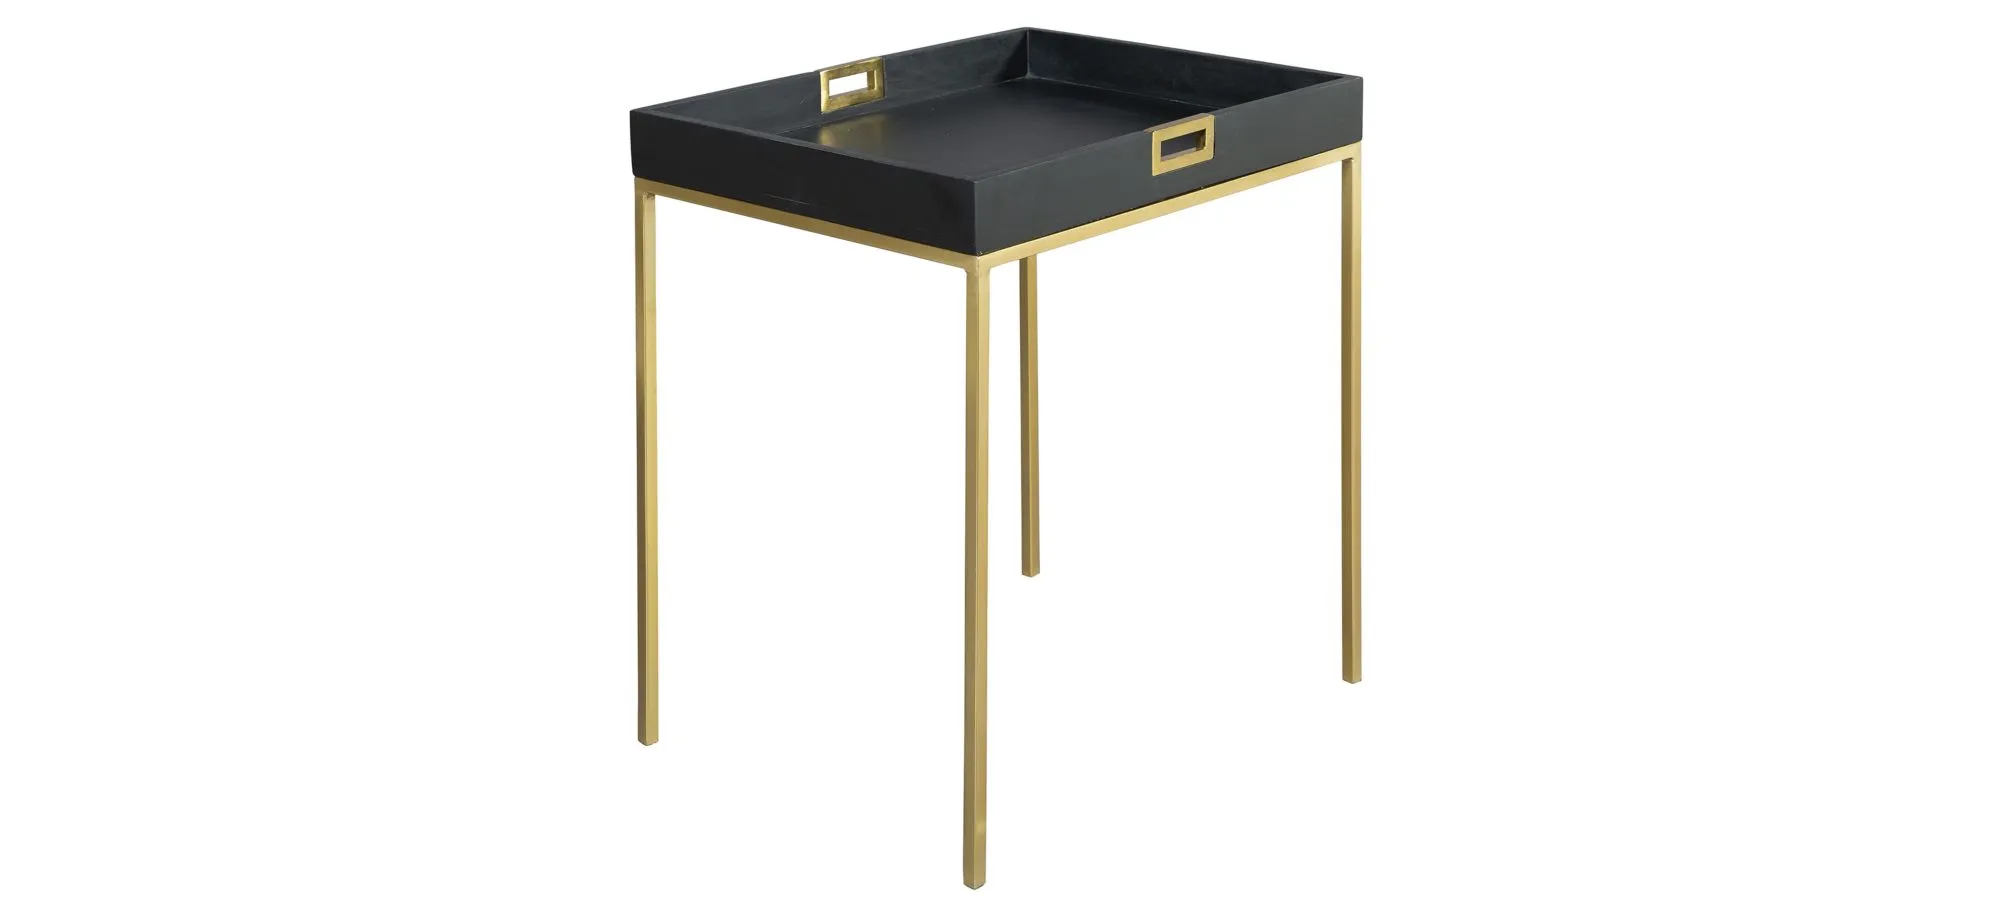 Special Reserve Tray Top Side Table in SPECIAL RESERVE by Hekman Furniture Company